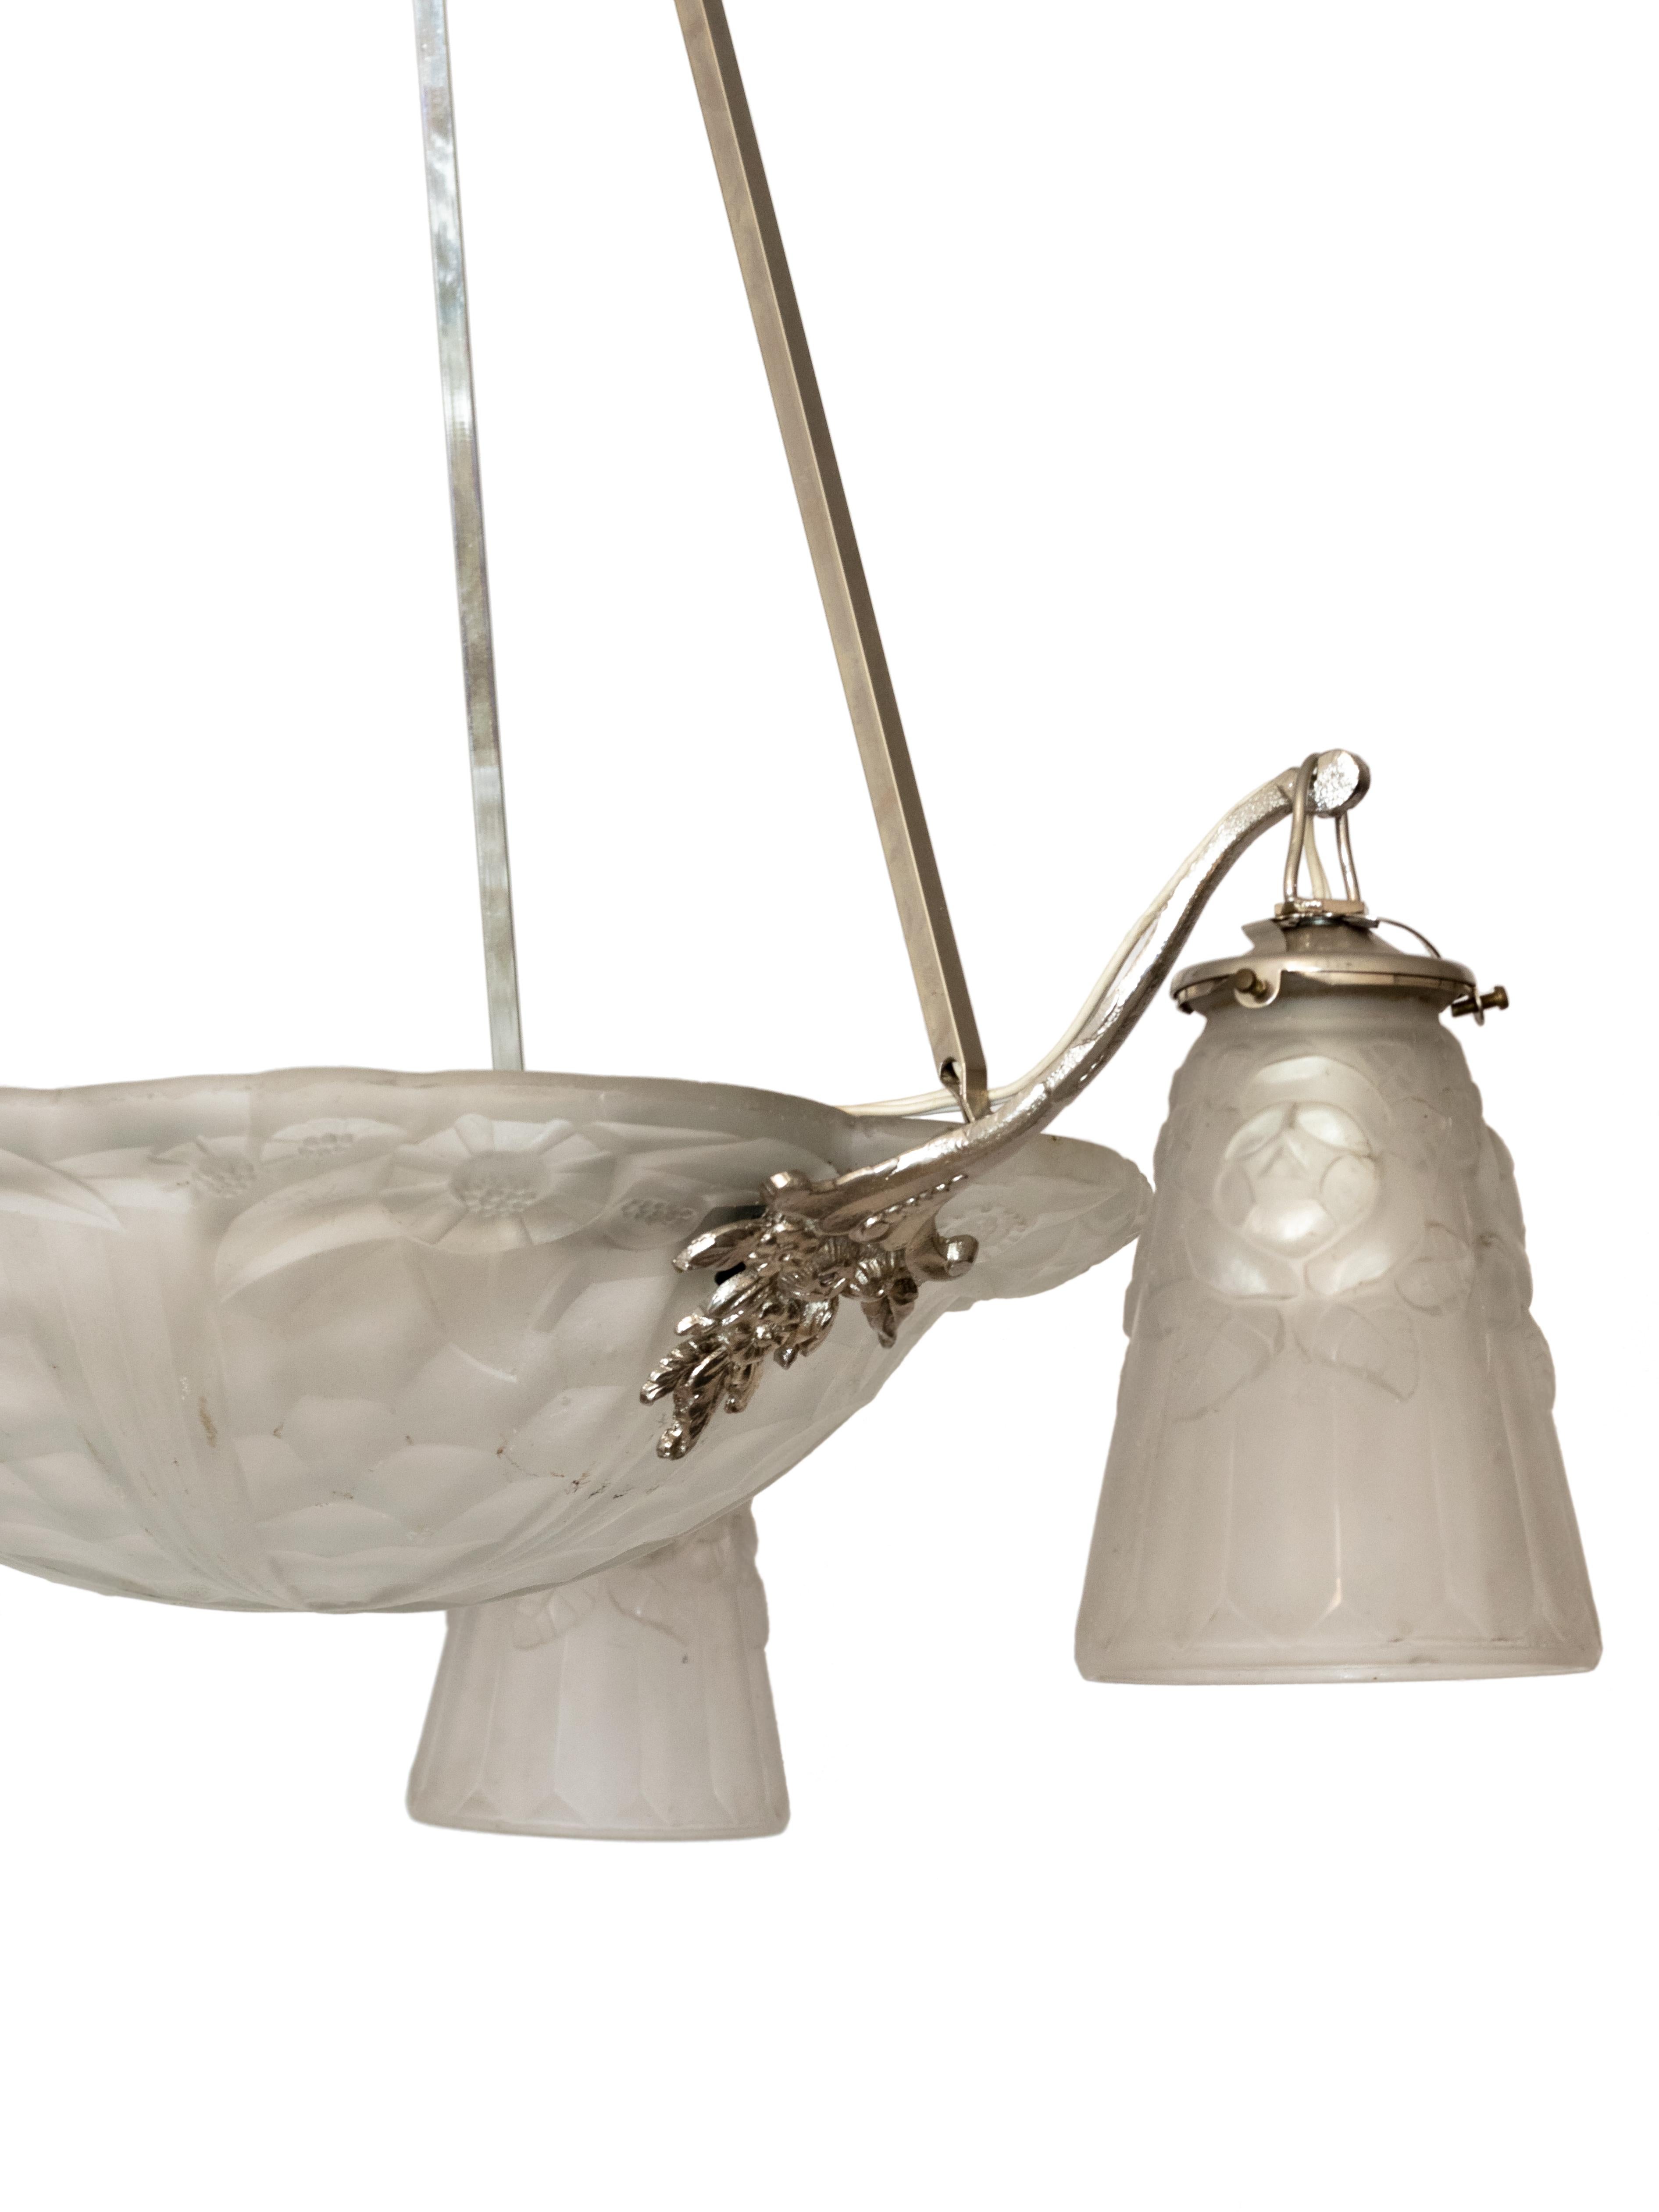 An exquisite white thick frosted glass with an Art Deco stylized floral pattern.
Three “Déngue” signed tulips (mark by David Guéron) and chromed metal structure and lamp.

Height 32,67 in (83 cm) 
Diameter 23,62 in (60 cm)

The chandelier is